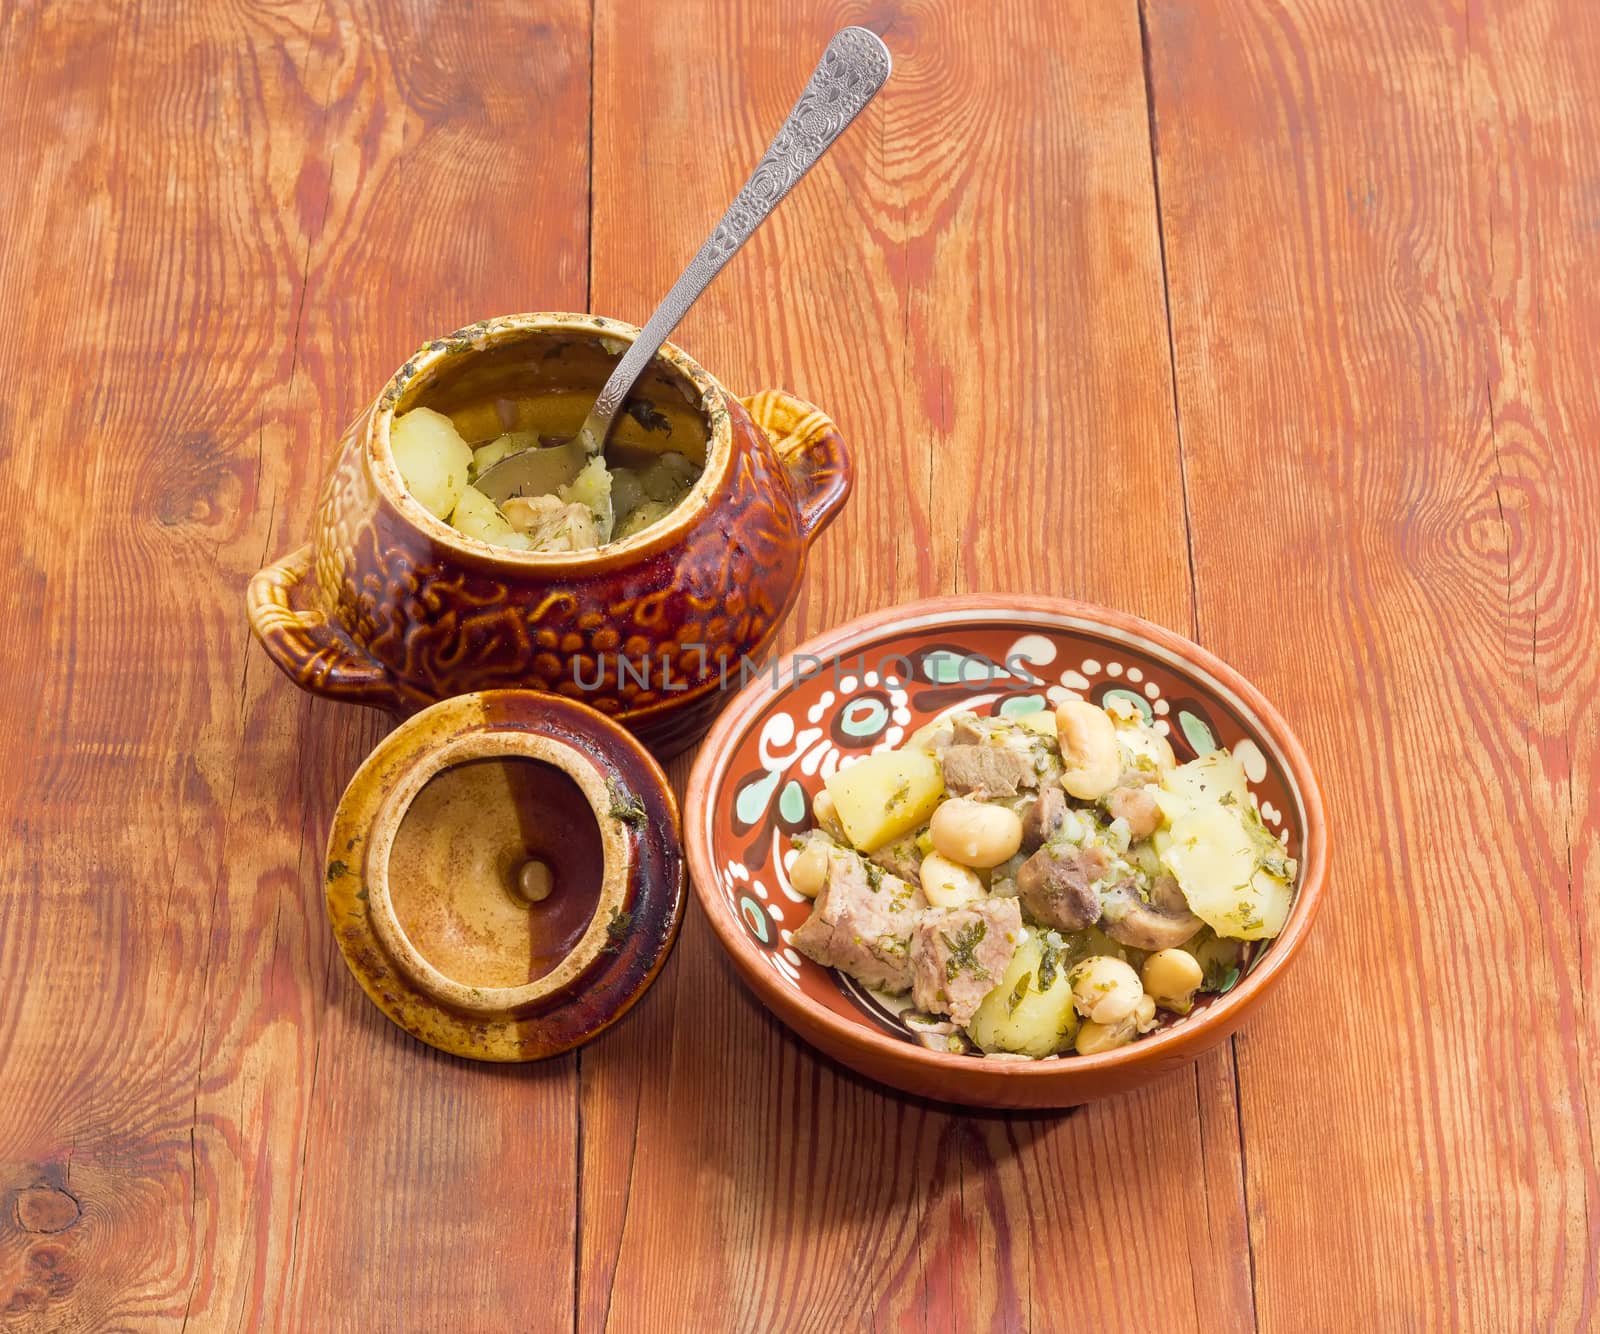 Ukrainian version of the dish Chanakhi in a clay bowl  - potatoes with meat, mushrooms and haricot beans roasted in a clay pot on a surface of an old wooden planks
